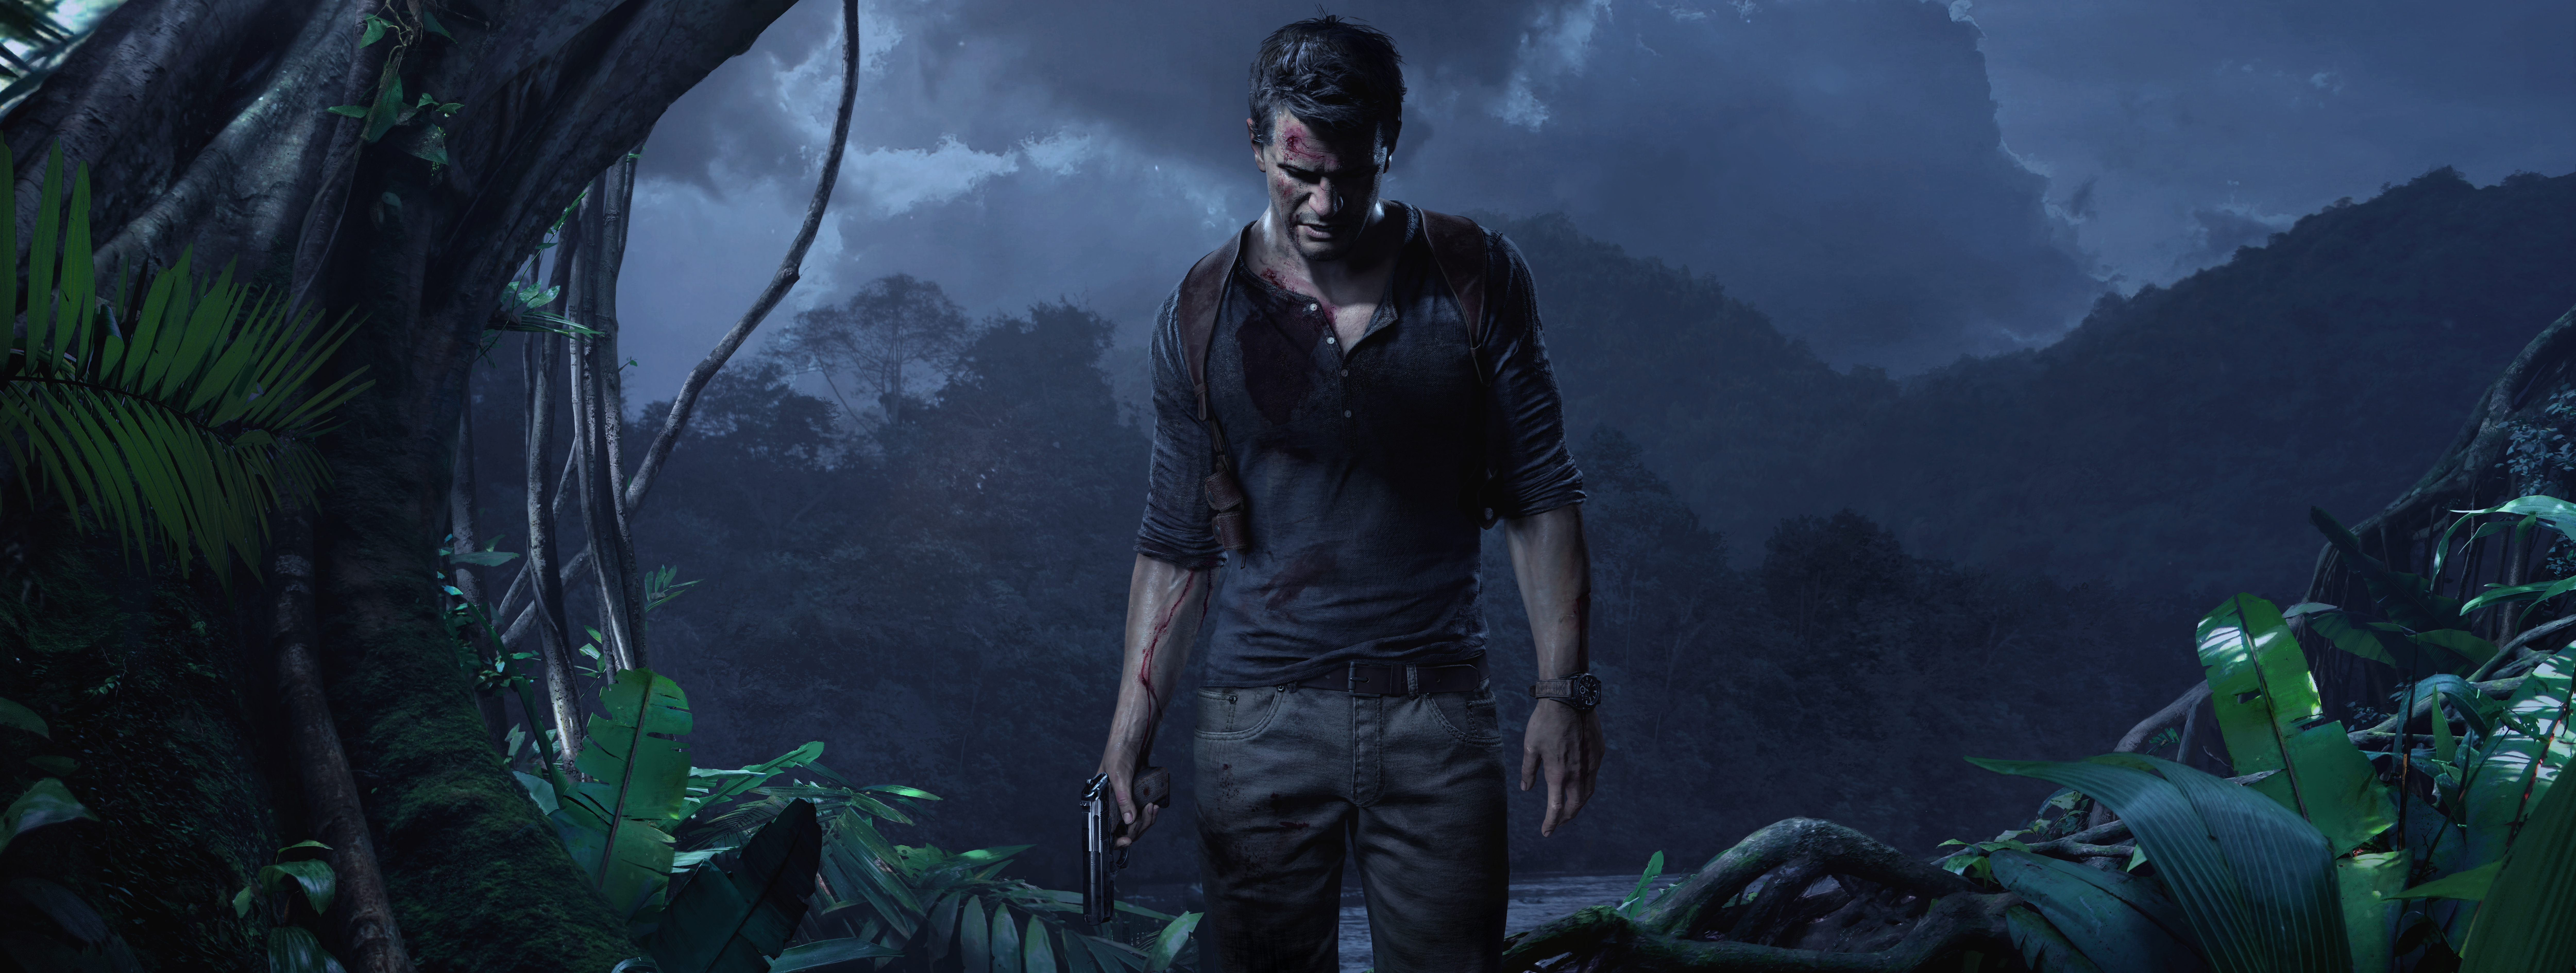 Video Game Uncharted 4: A Thief's End 4k Ultra HD Wallpaper